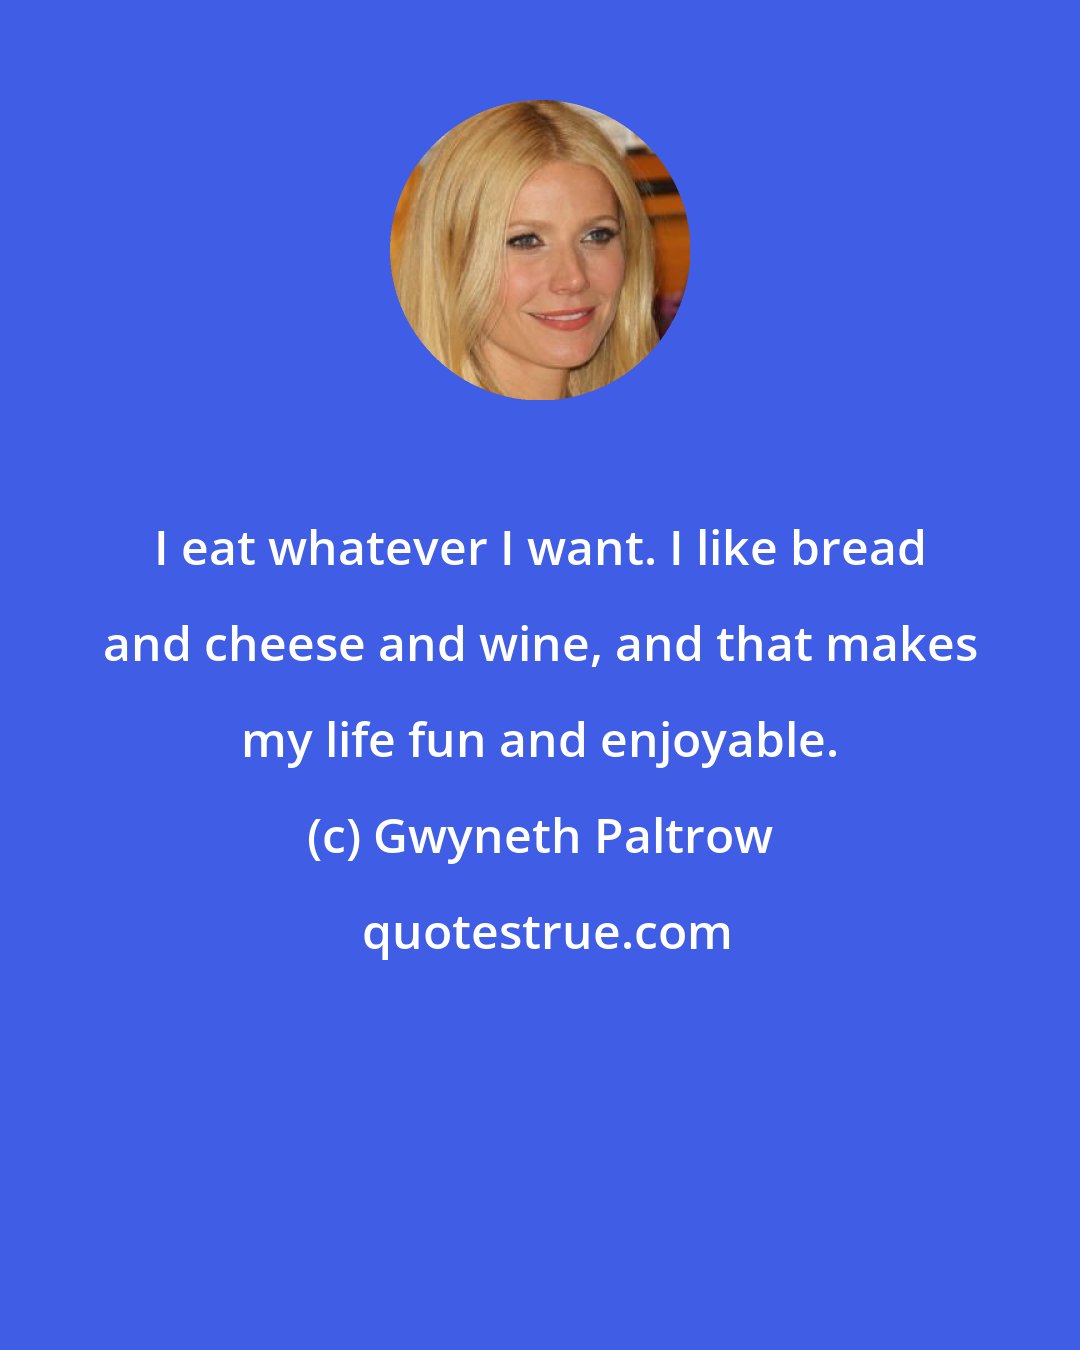 Gwyneth Paltrow: I eat whatever I want. I like bread and cheese and wine, and that makes my life fun and enjoyable.